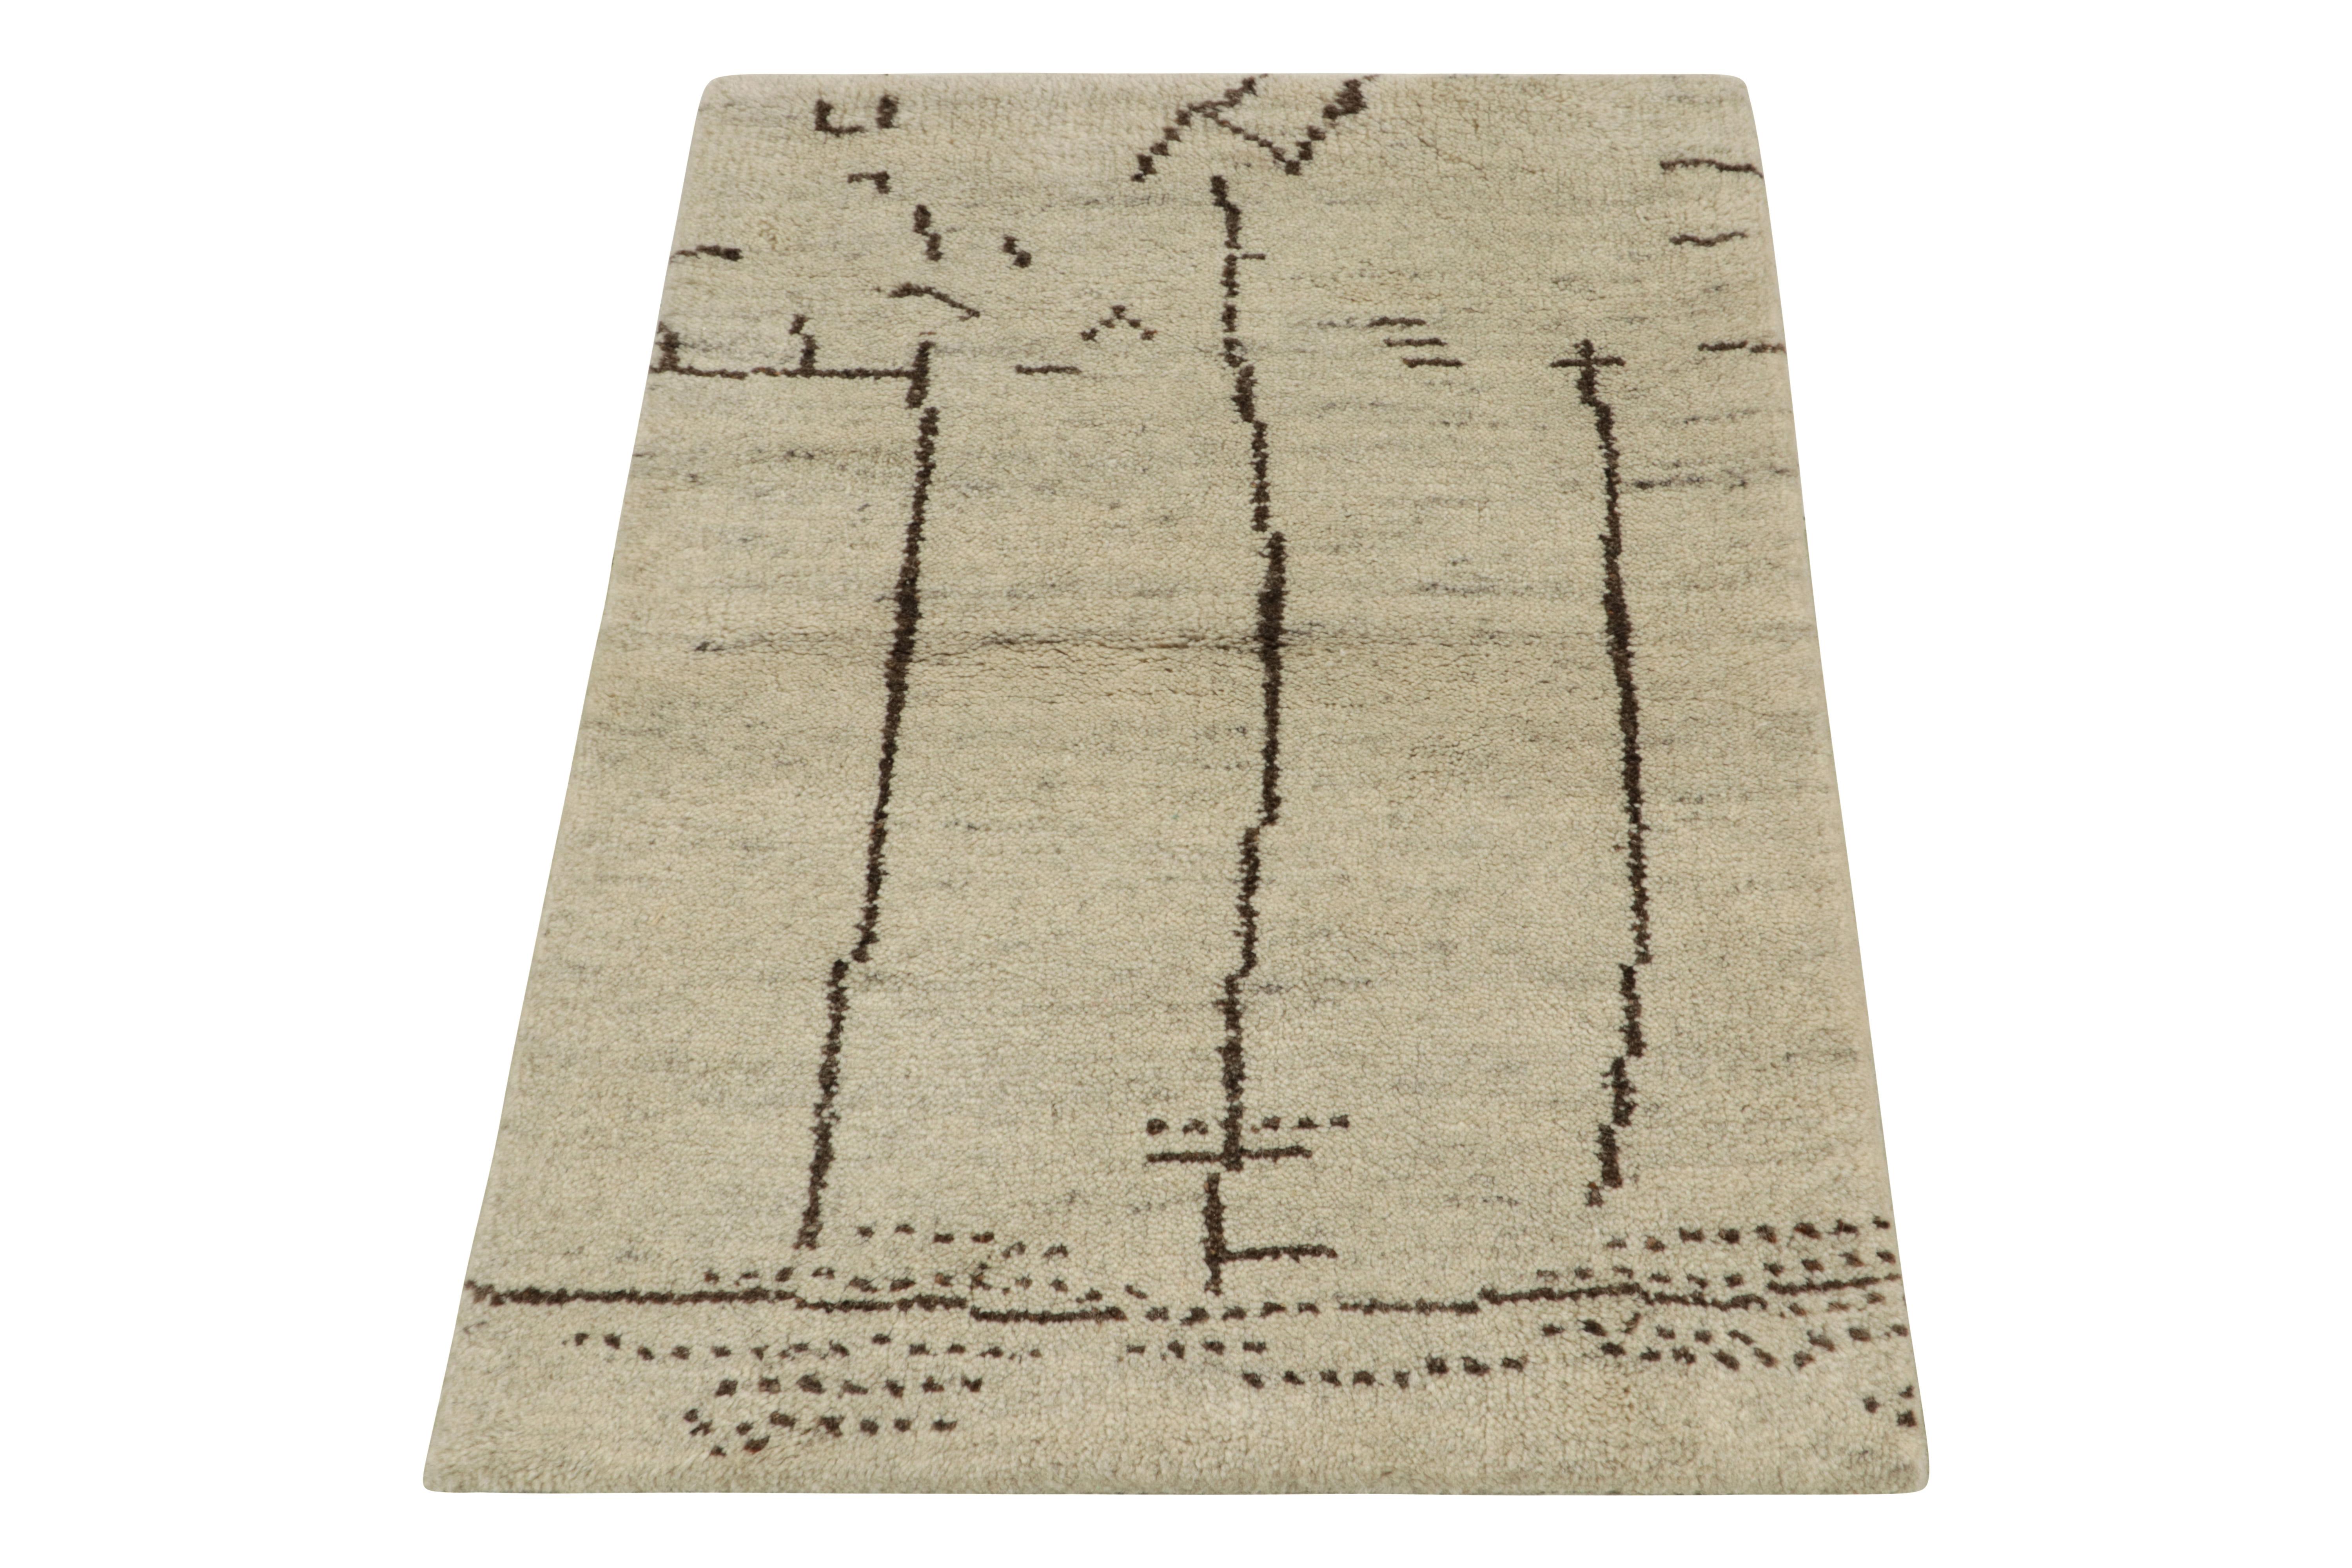 Hand-knotted in wool, a 2x3 rendering inspired by Moroccan style exemplifying Rug & Kilim’s take on contemporary aesthetics. The subtle appeal of the rug comes from a minimal geometric design playing comfortably with the negative space in a beige